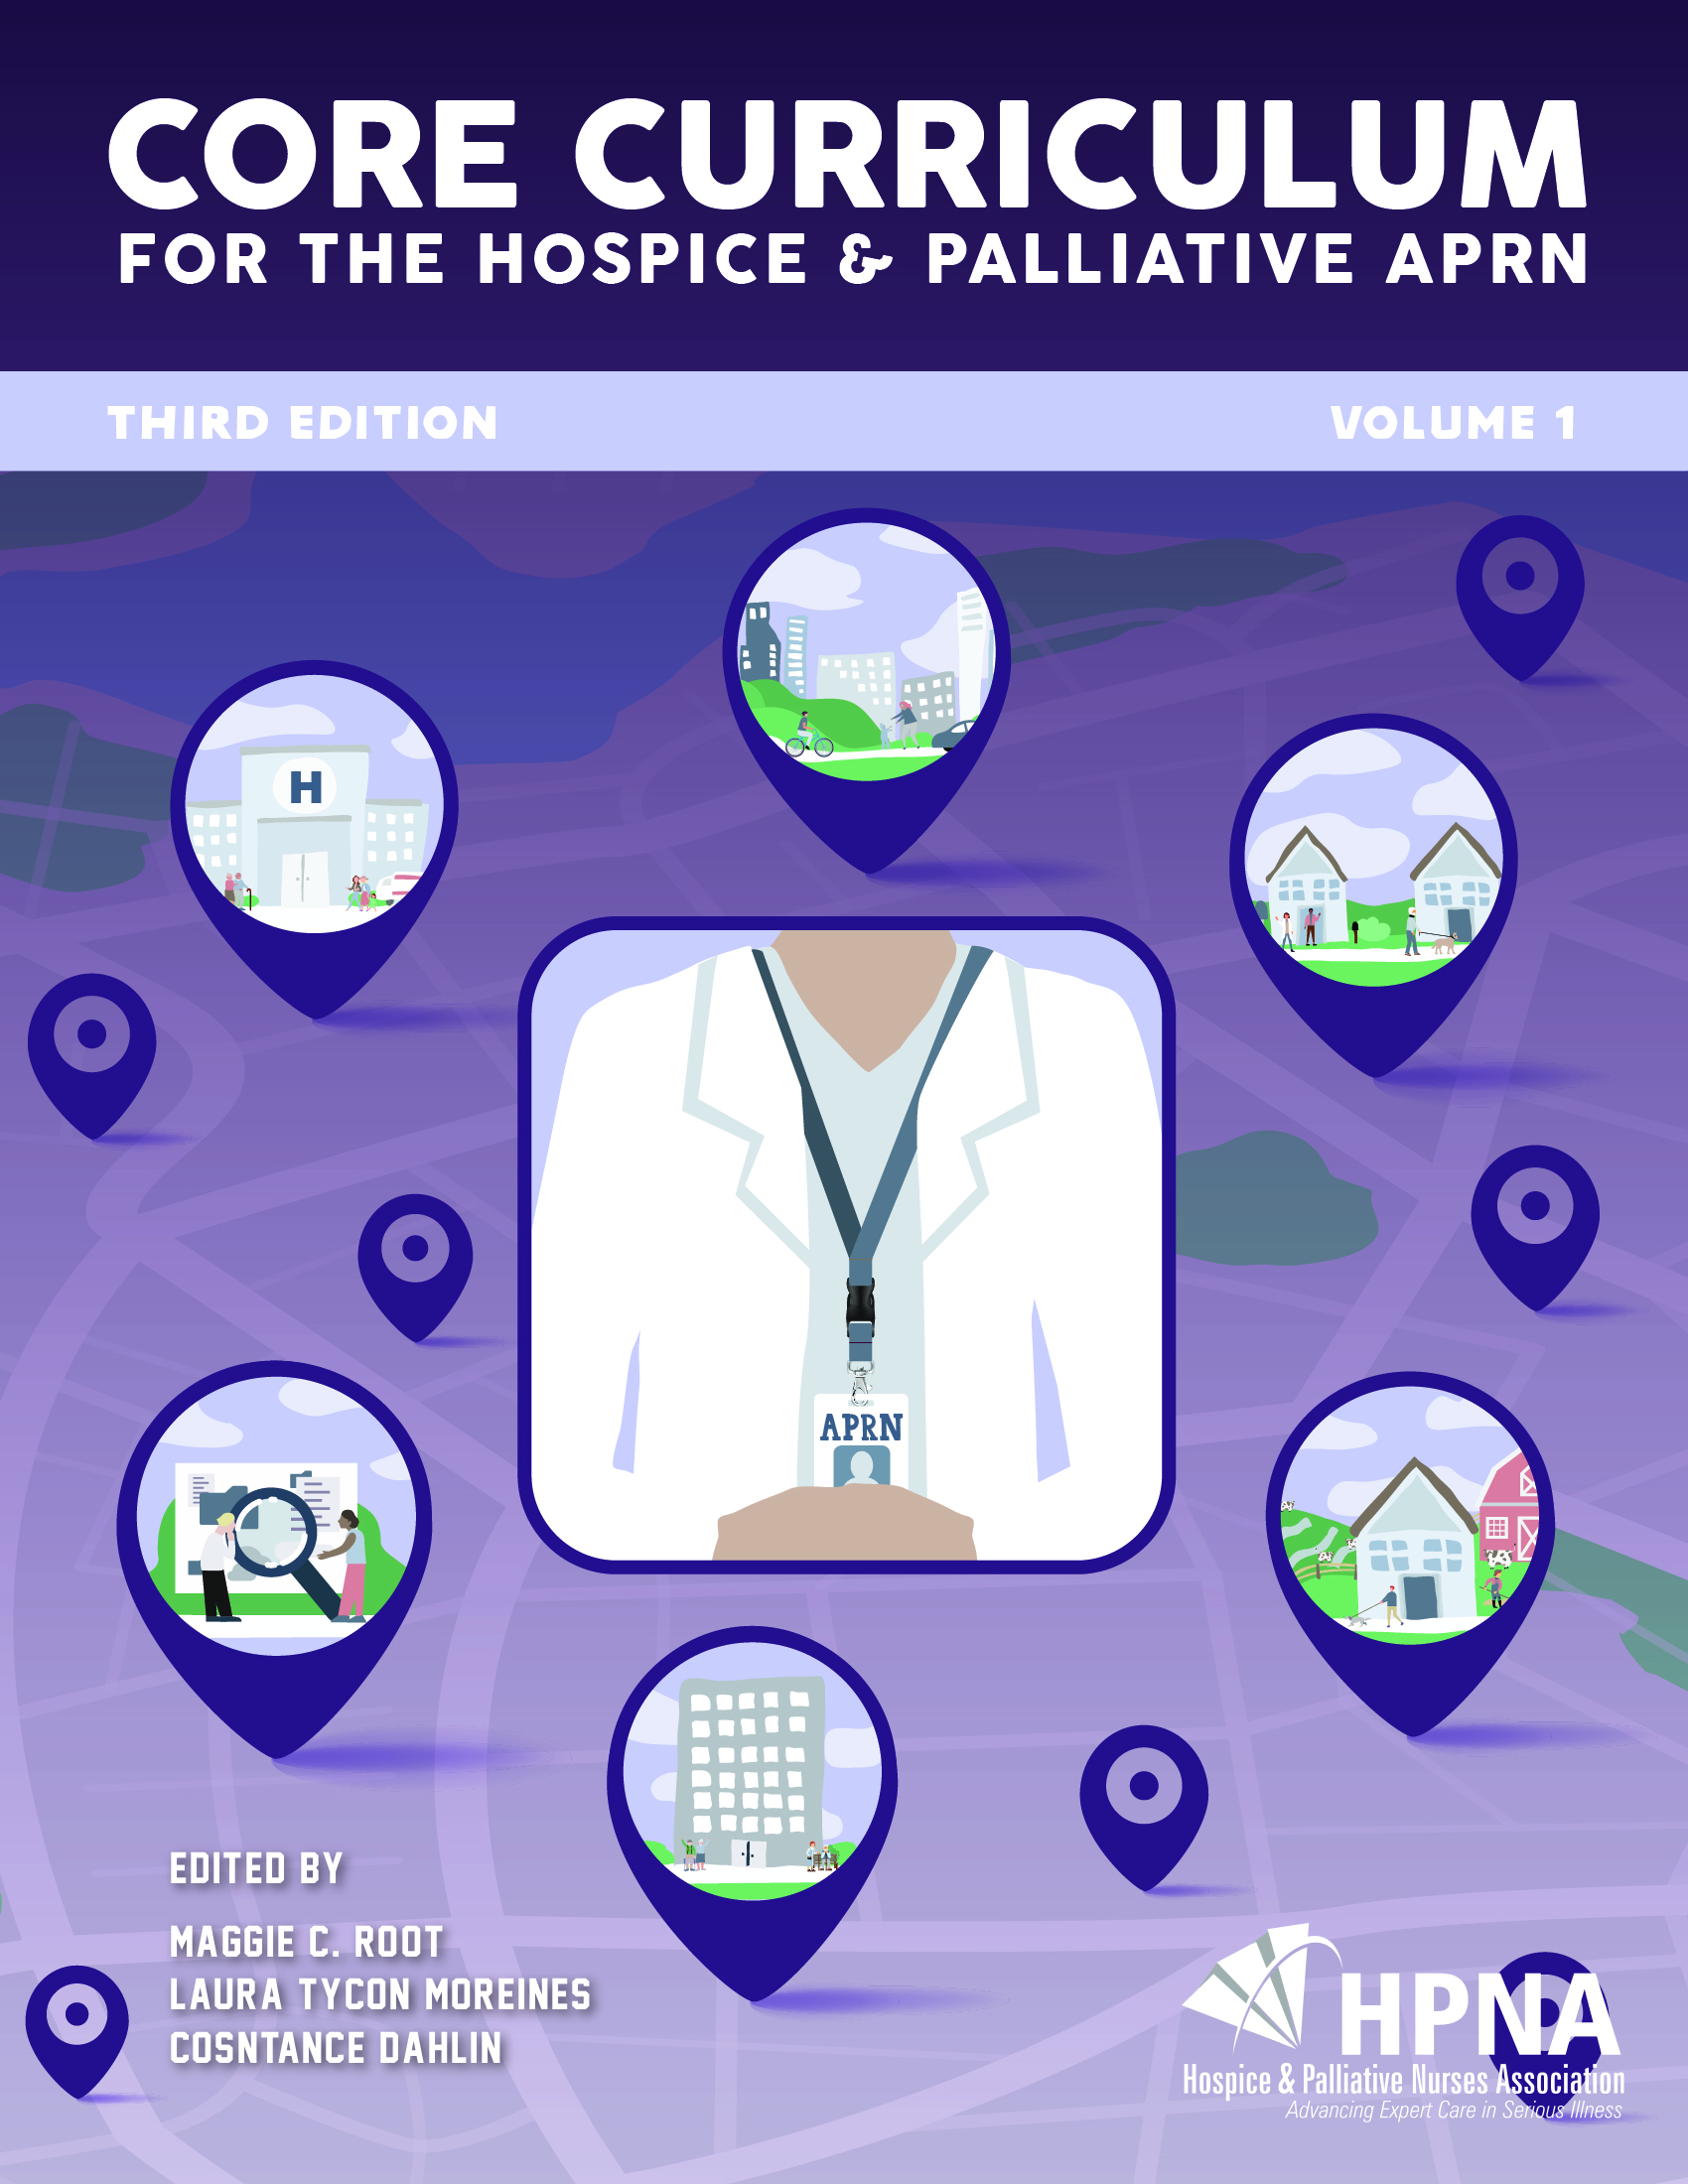 Core Curriculum for the Hospice and Palliative APRN